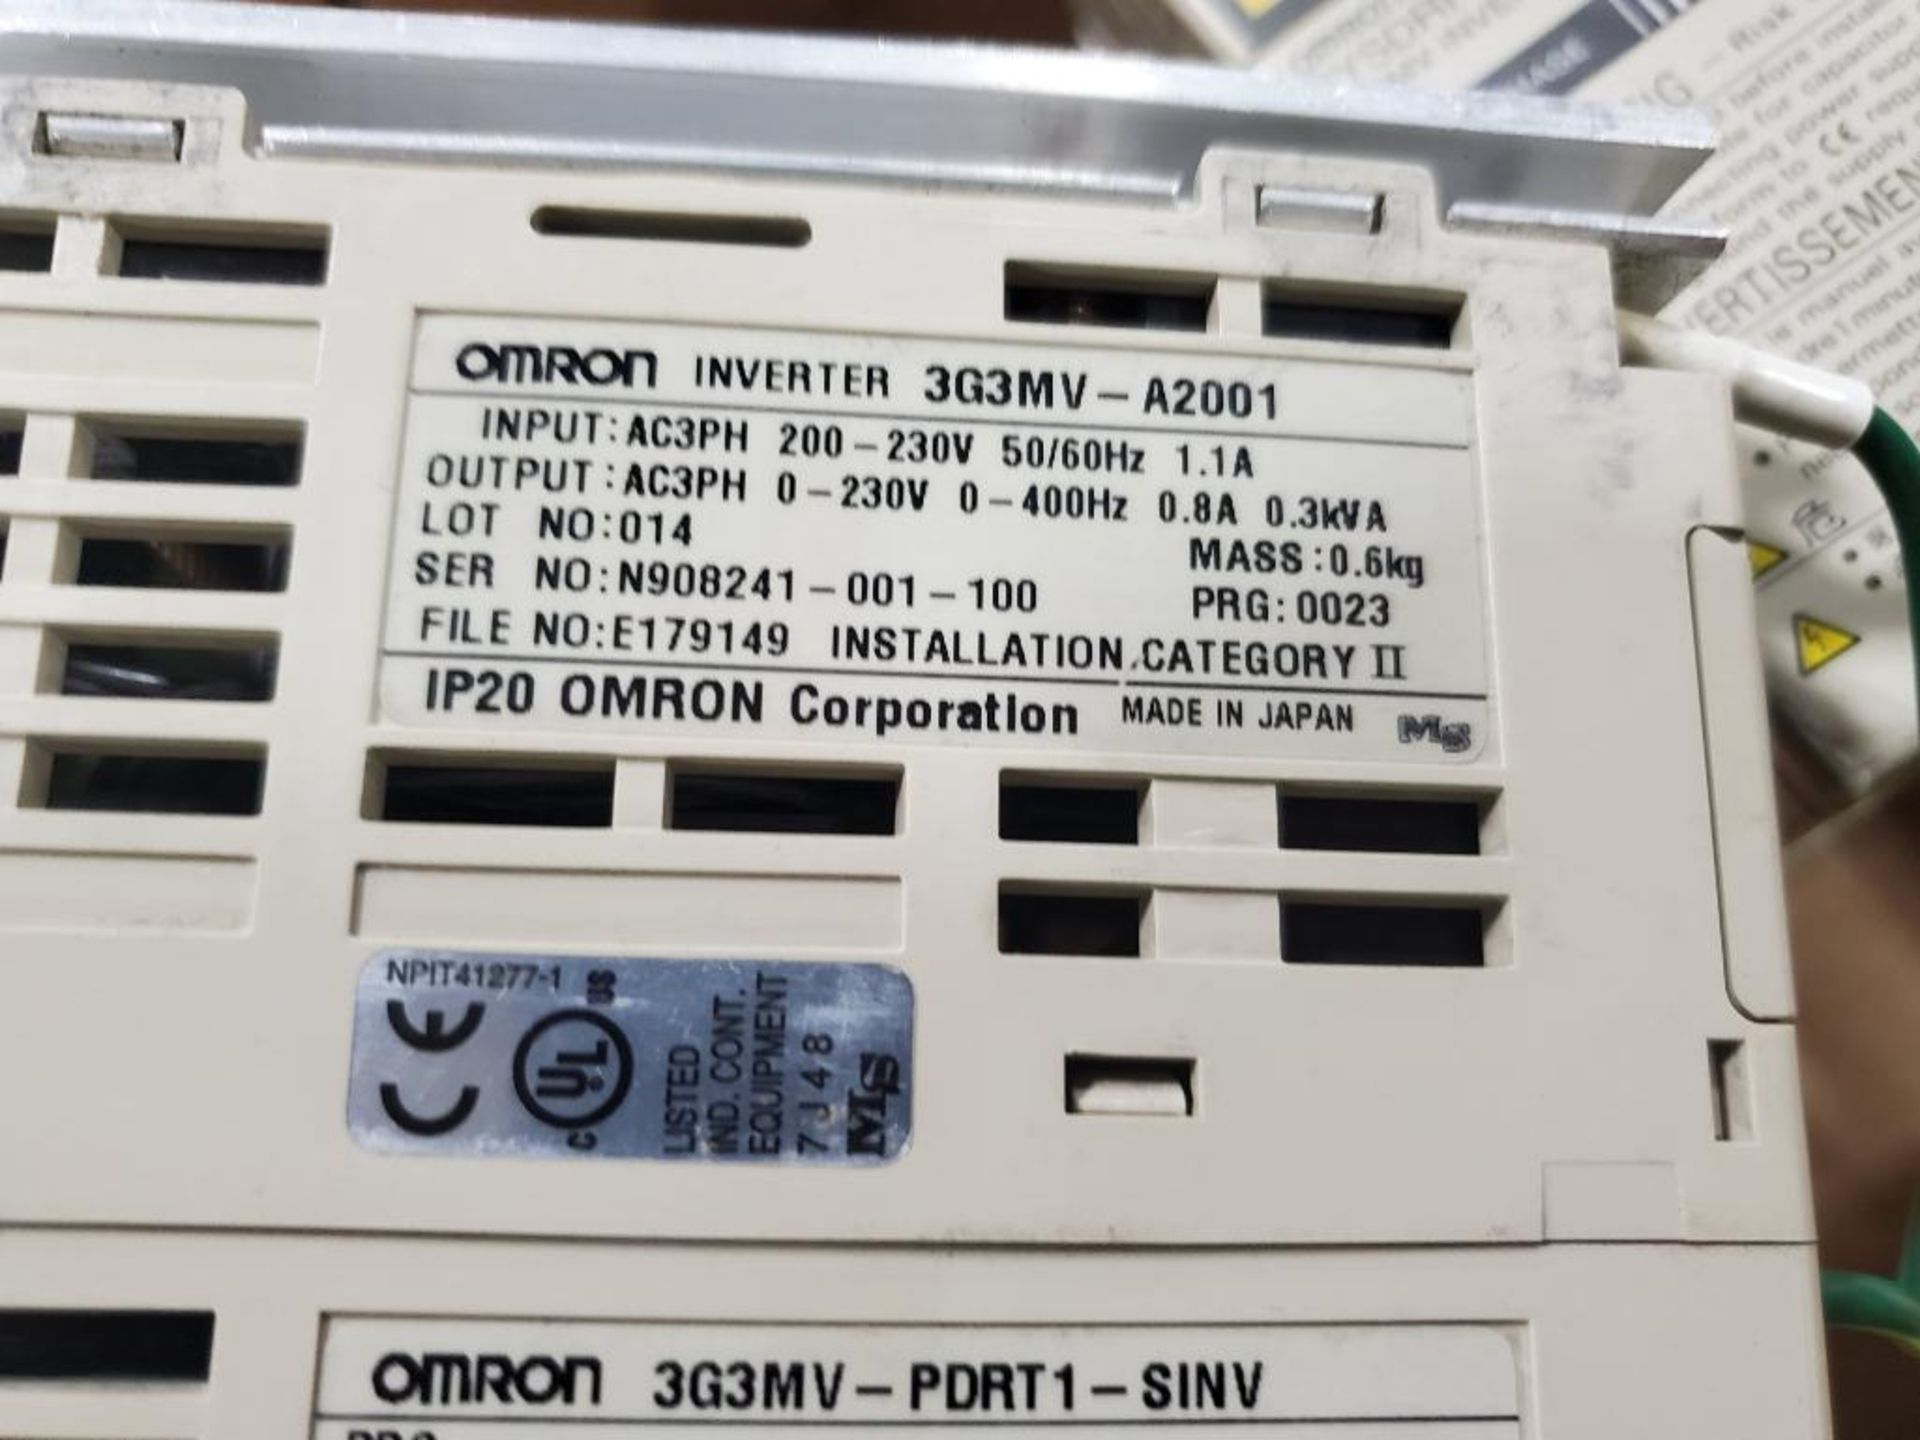 Qty 2 - Assorted Omron SYSDRIVE 3G3MV inverter drive. - Image 3 of 6